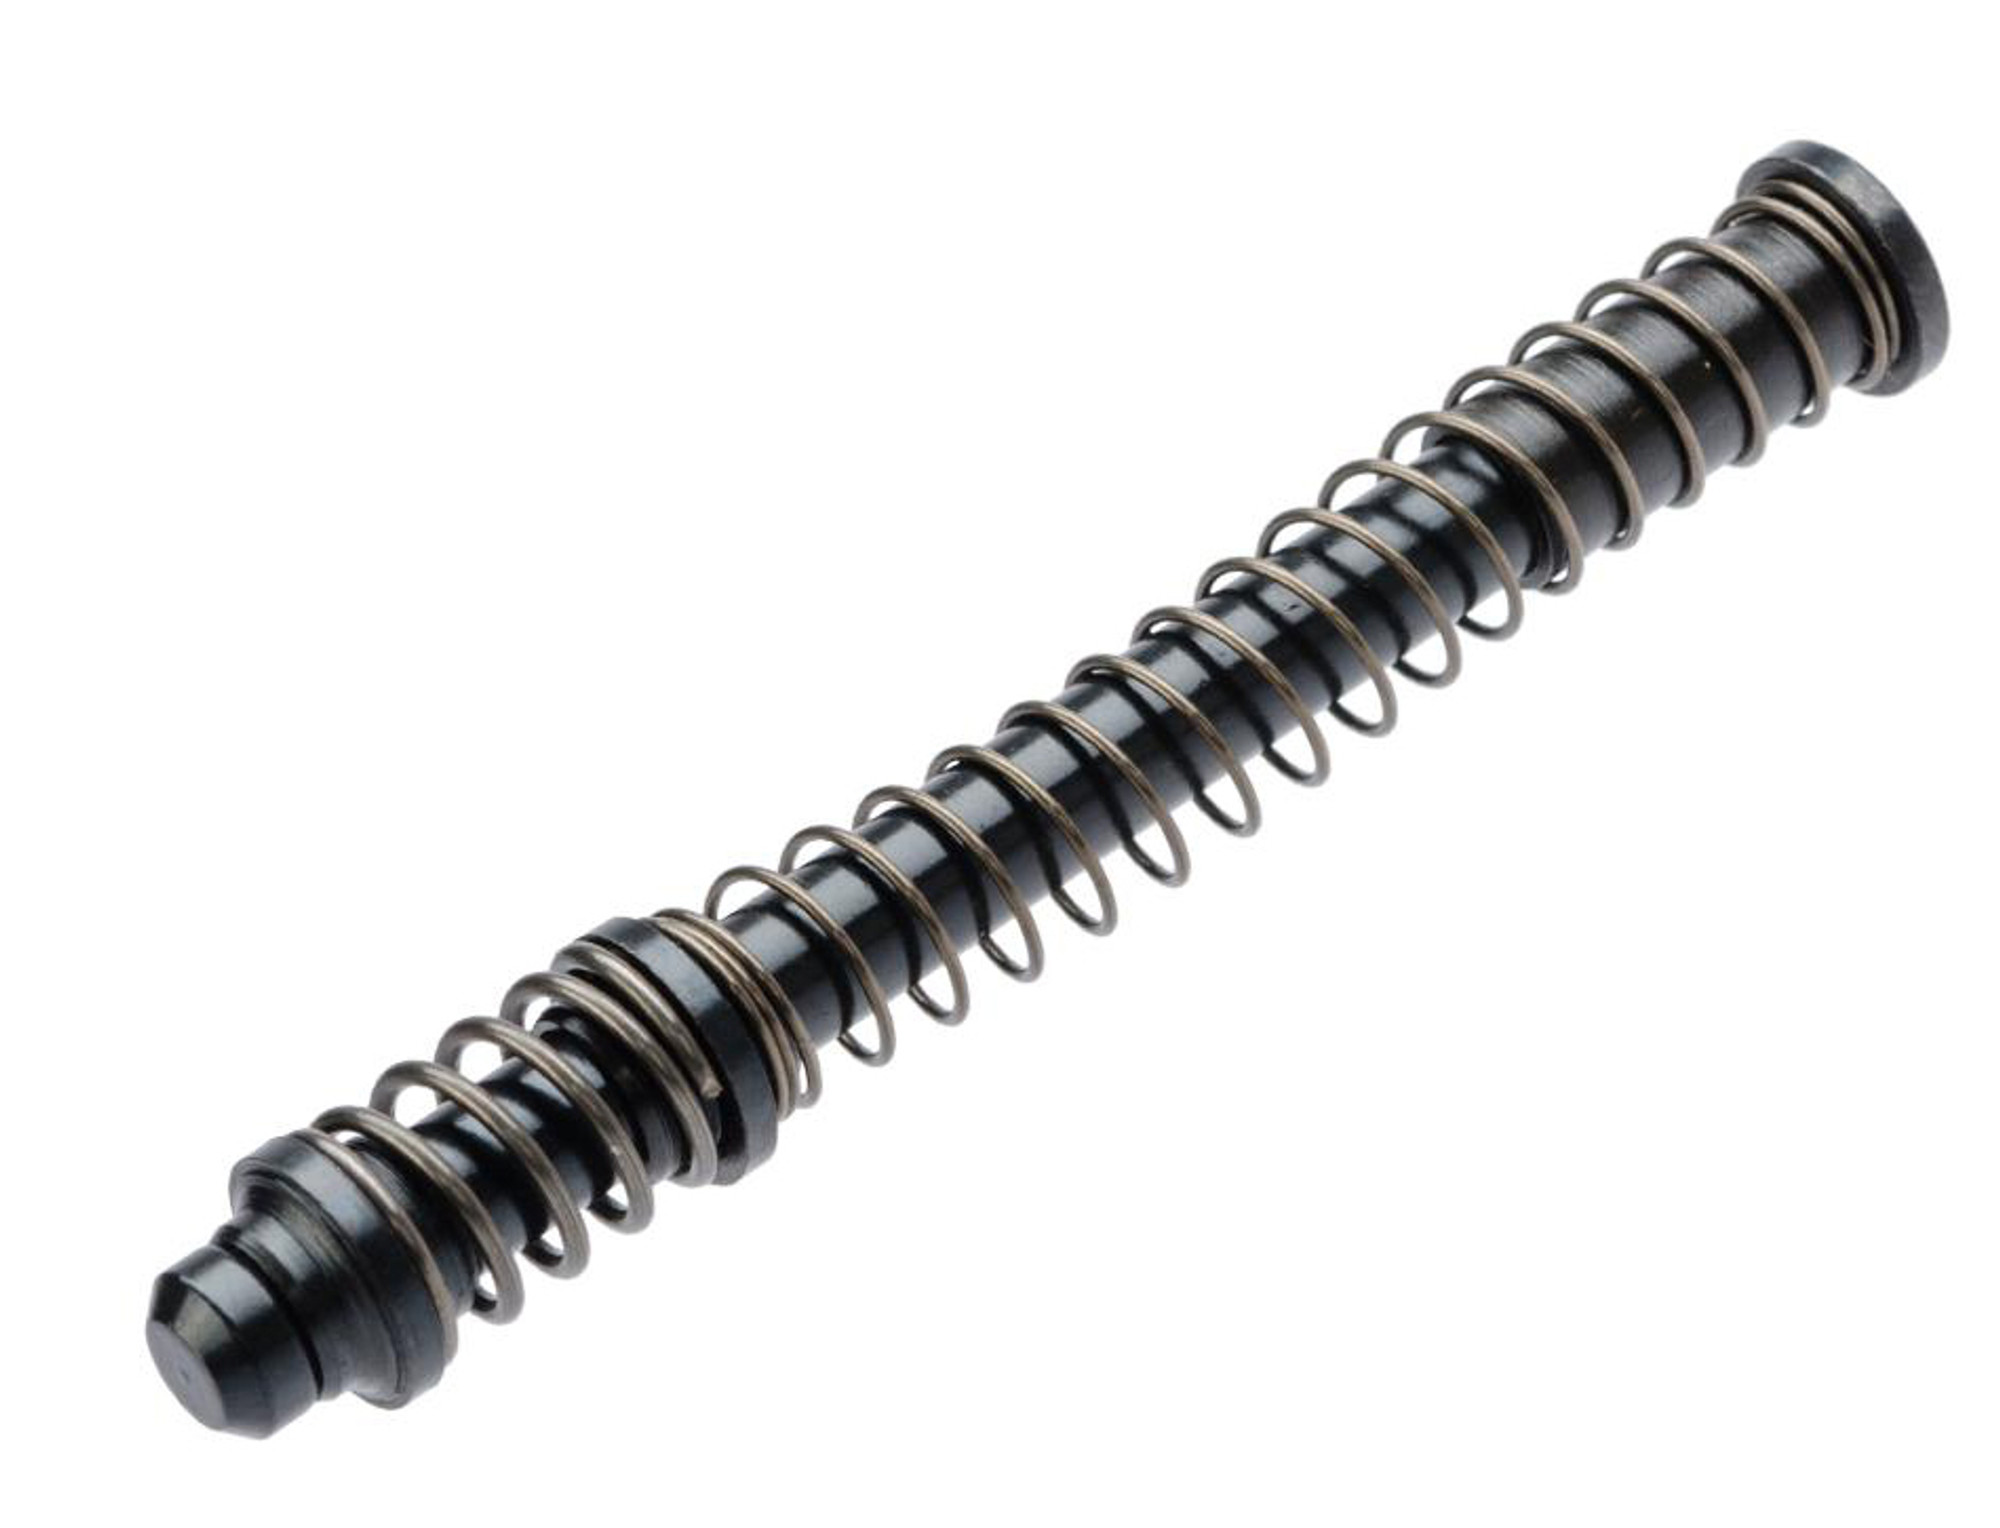 Airsoft Master Gunsmith (AMG) High Efficiency Recoil Spring Guide for EMG SAI BLU Compatible Series Airsoft GBB Pistols